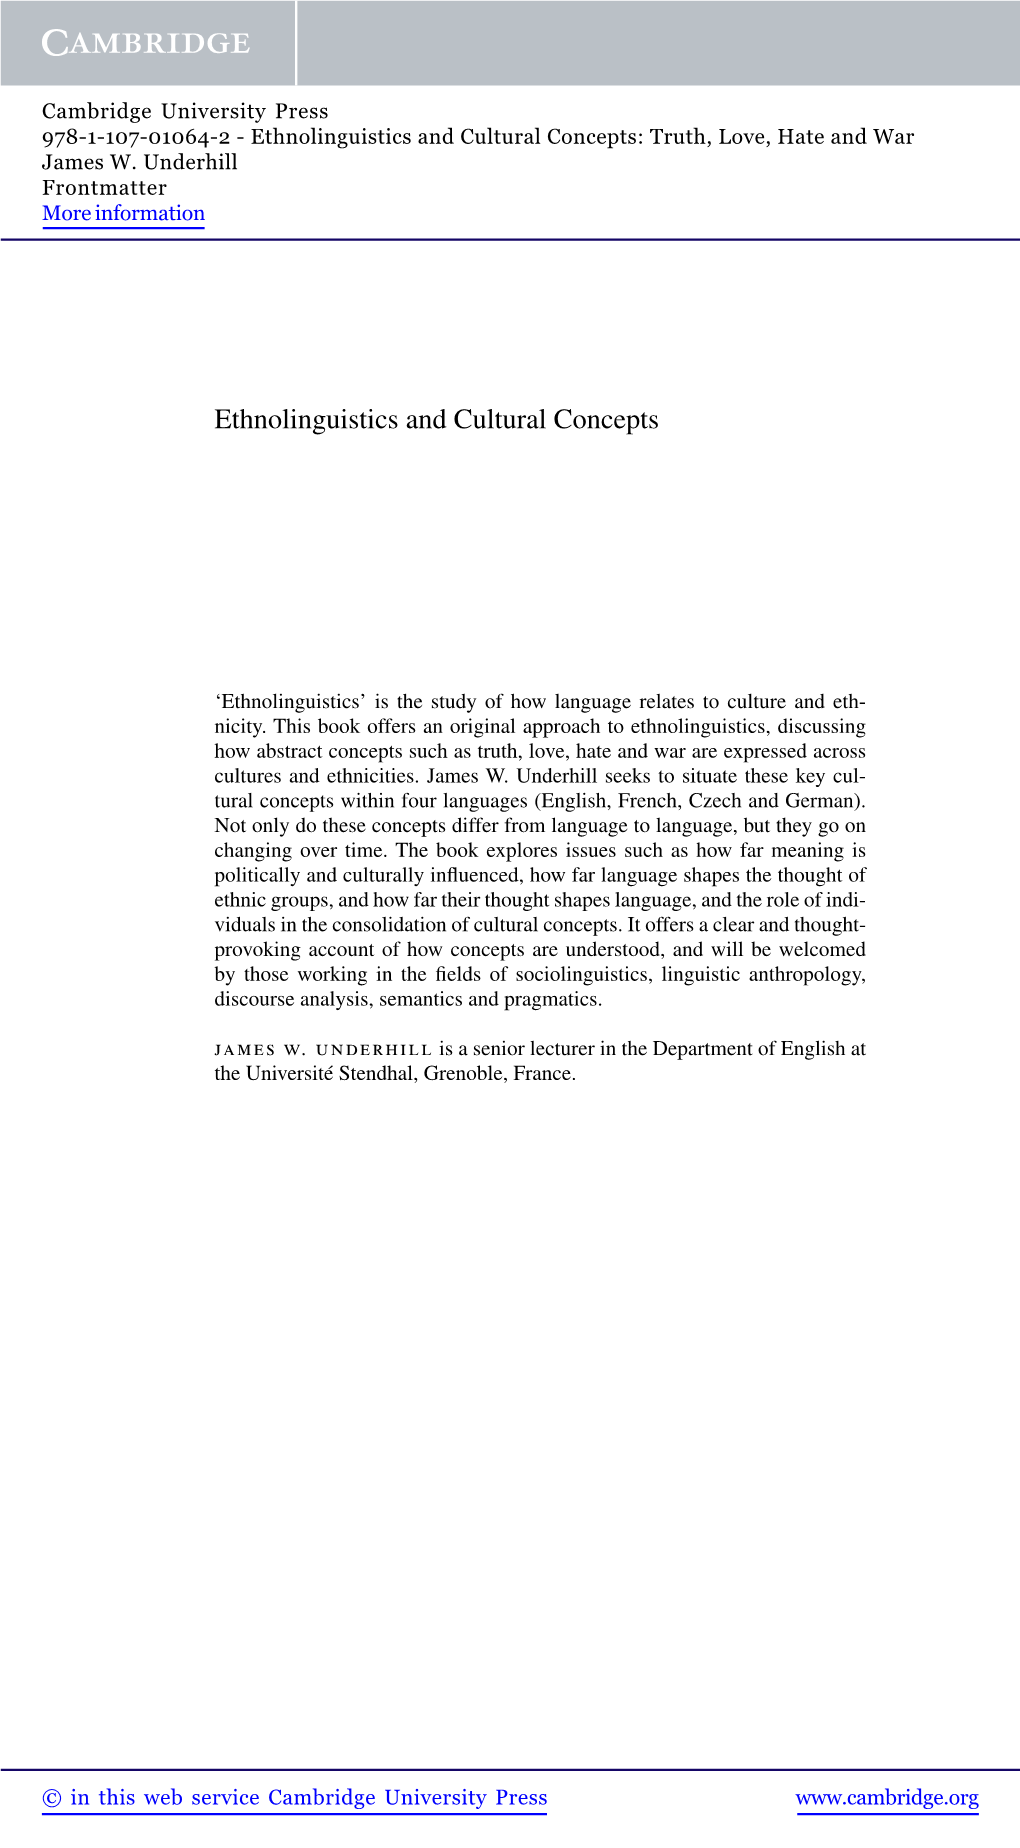 Ethnolinguistics and Cultural Concepts: Truth, Love, Hate and War James W